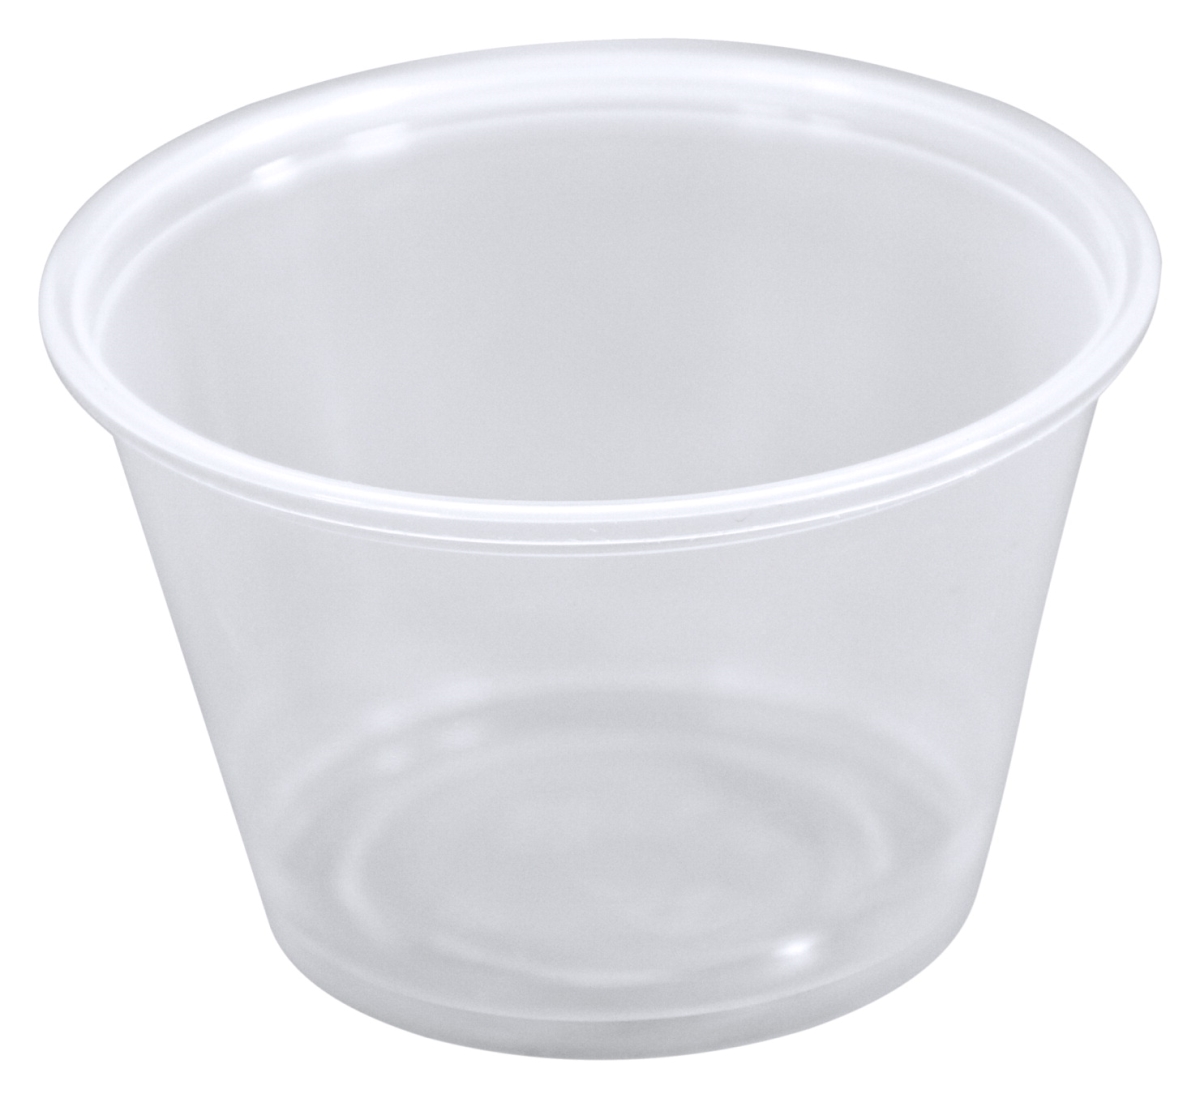 2003905 4 Oz Portion Cups, Clear - Pack Of 100